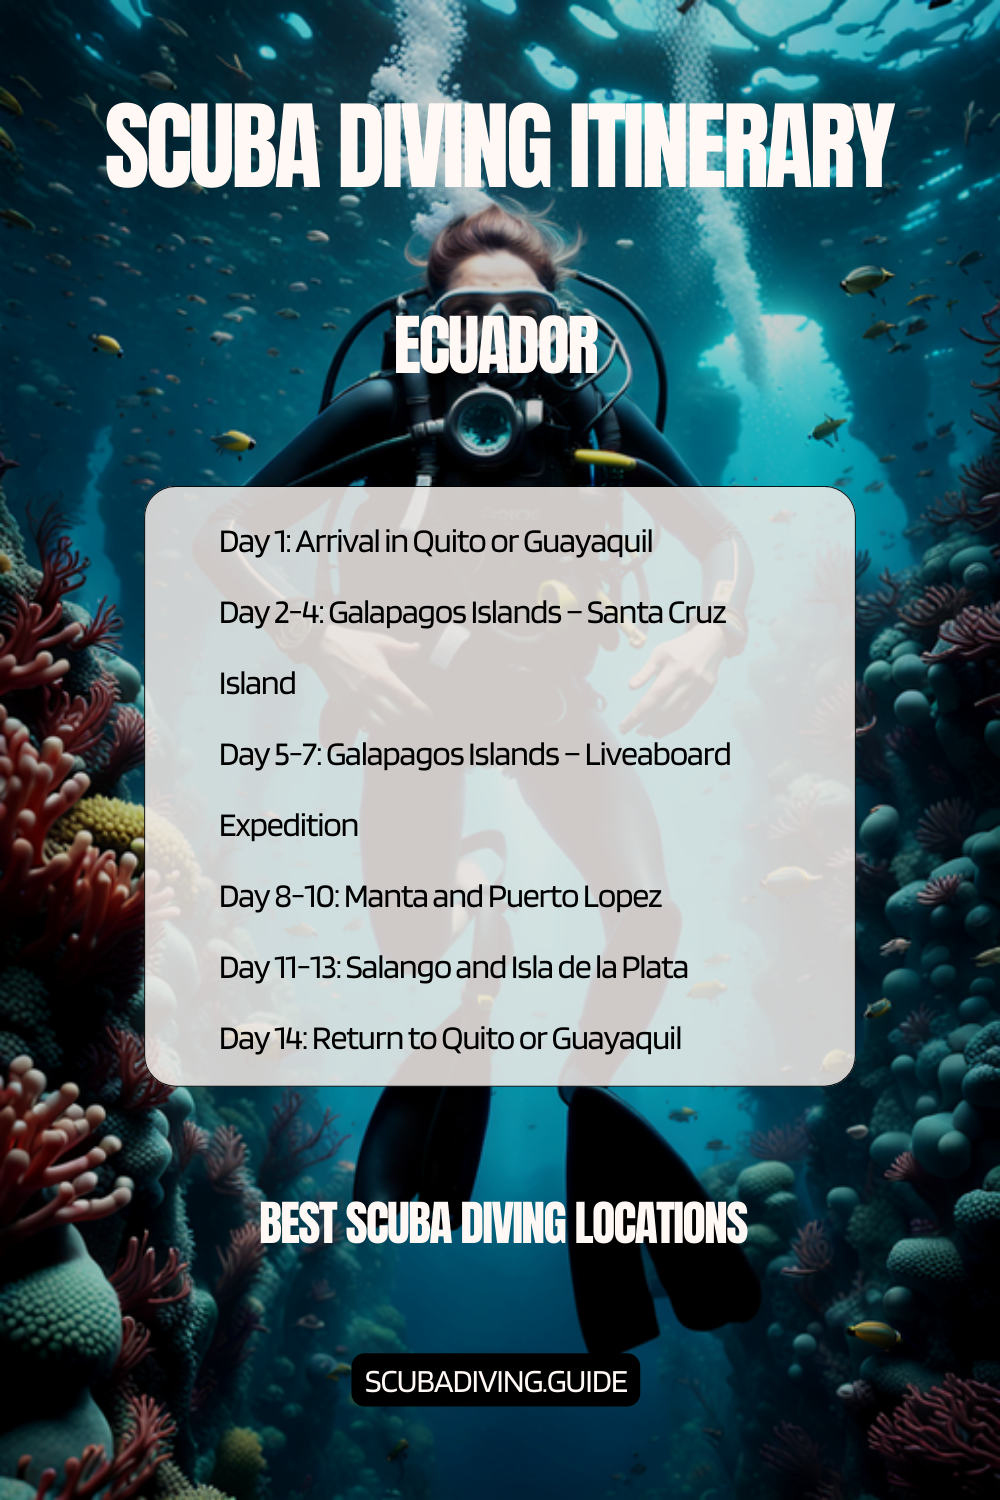 Ecuador Recommended Scuba Diving Itinerary